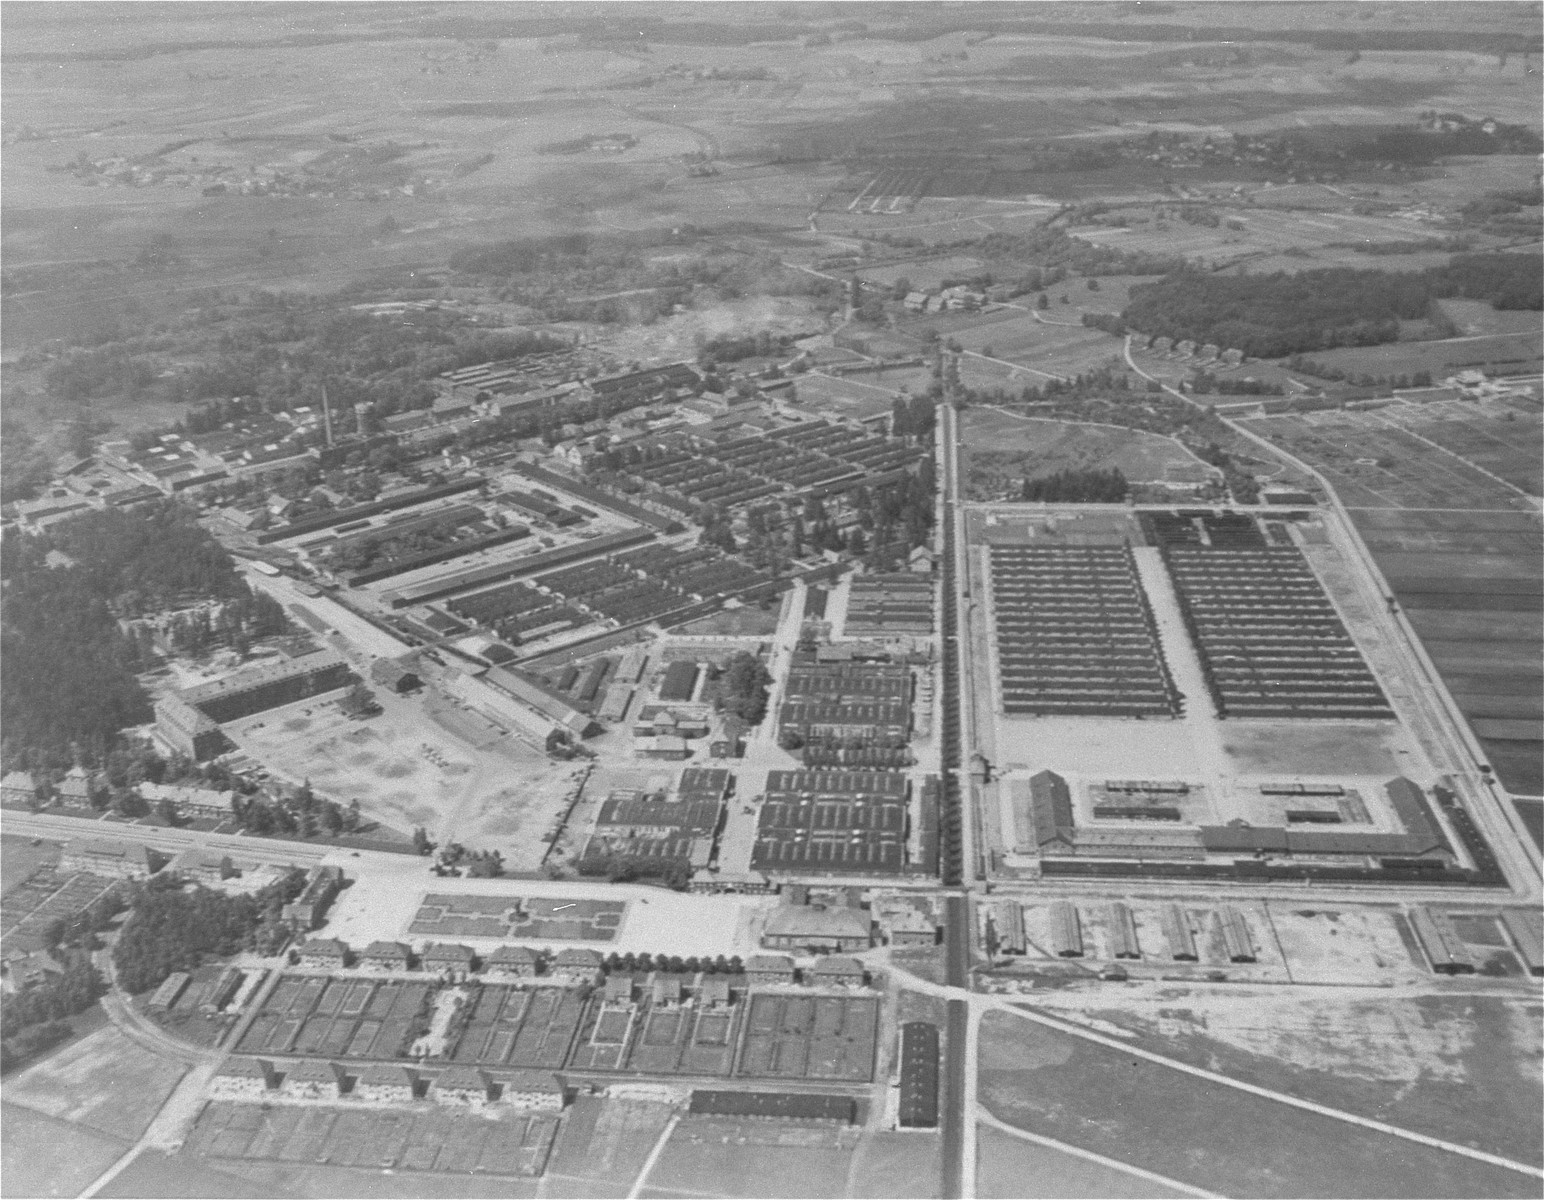 An aerial view of the Dachau concentration camp.